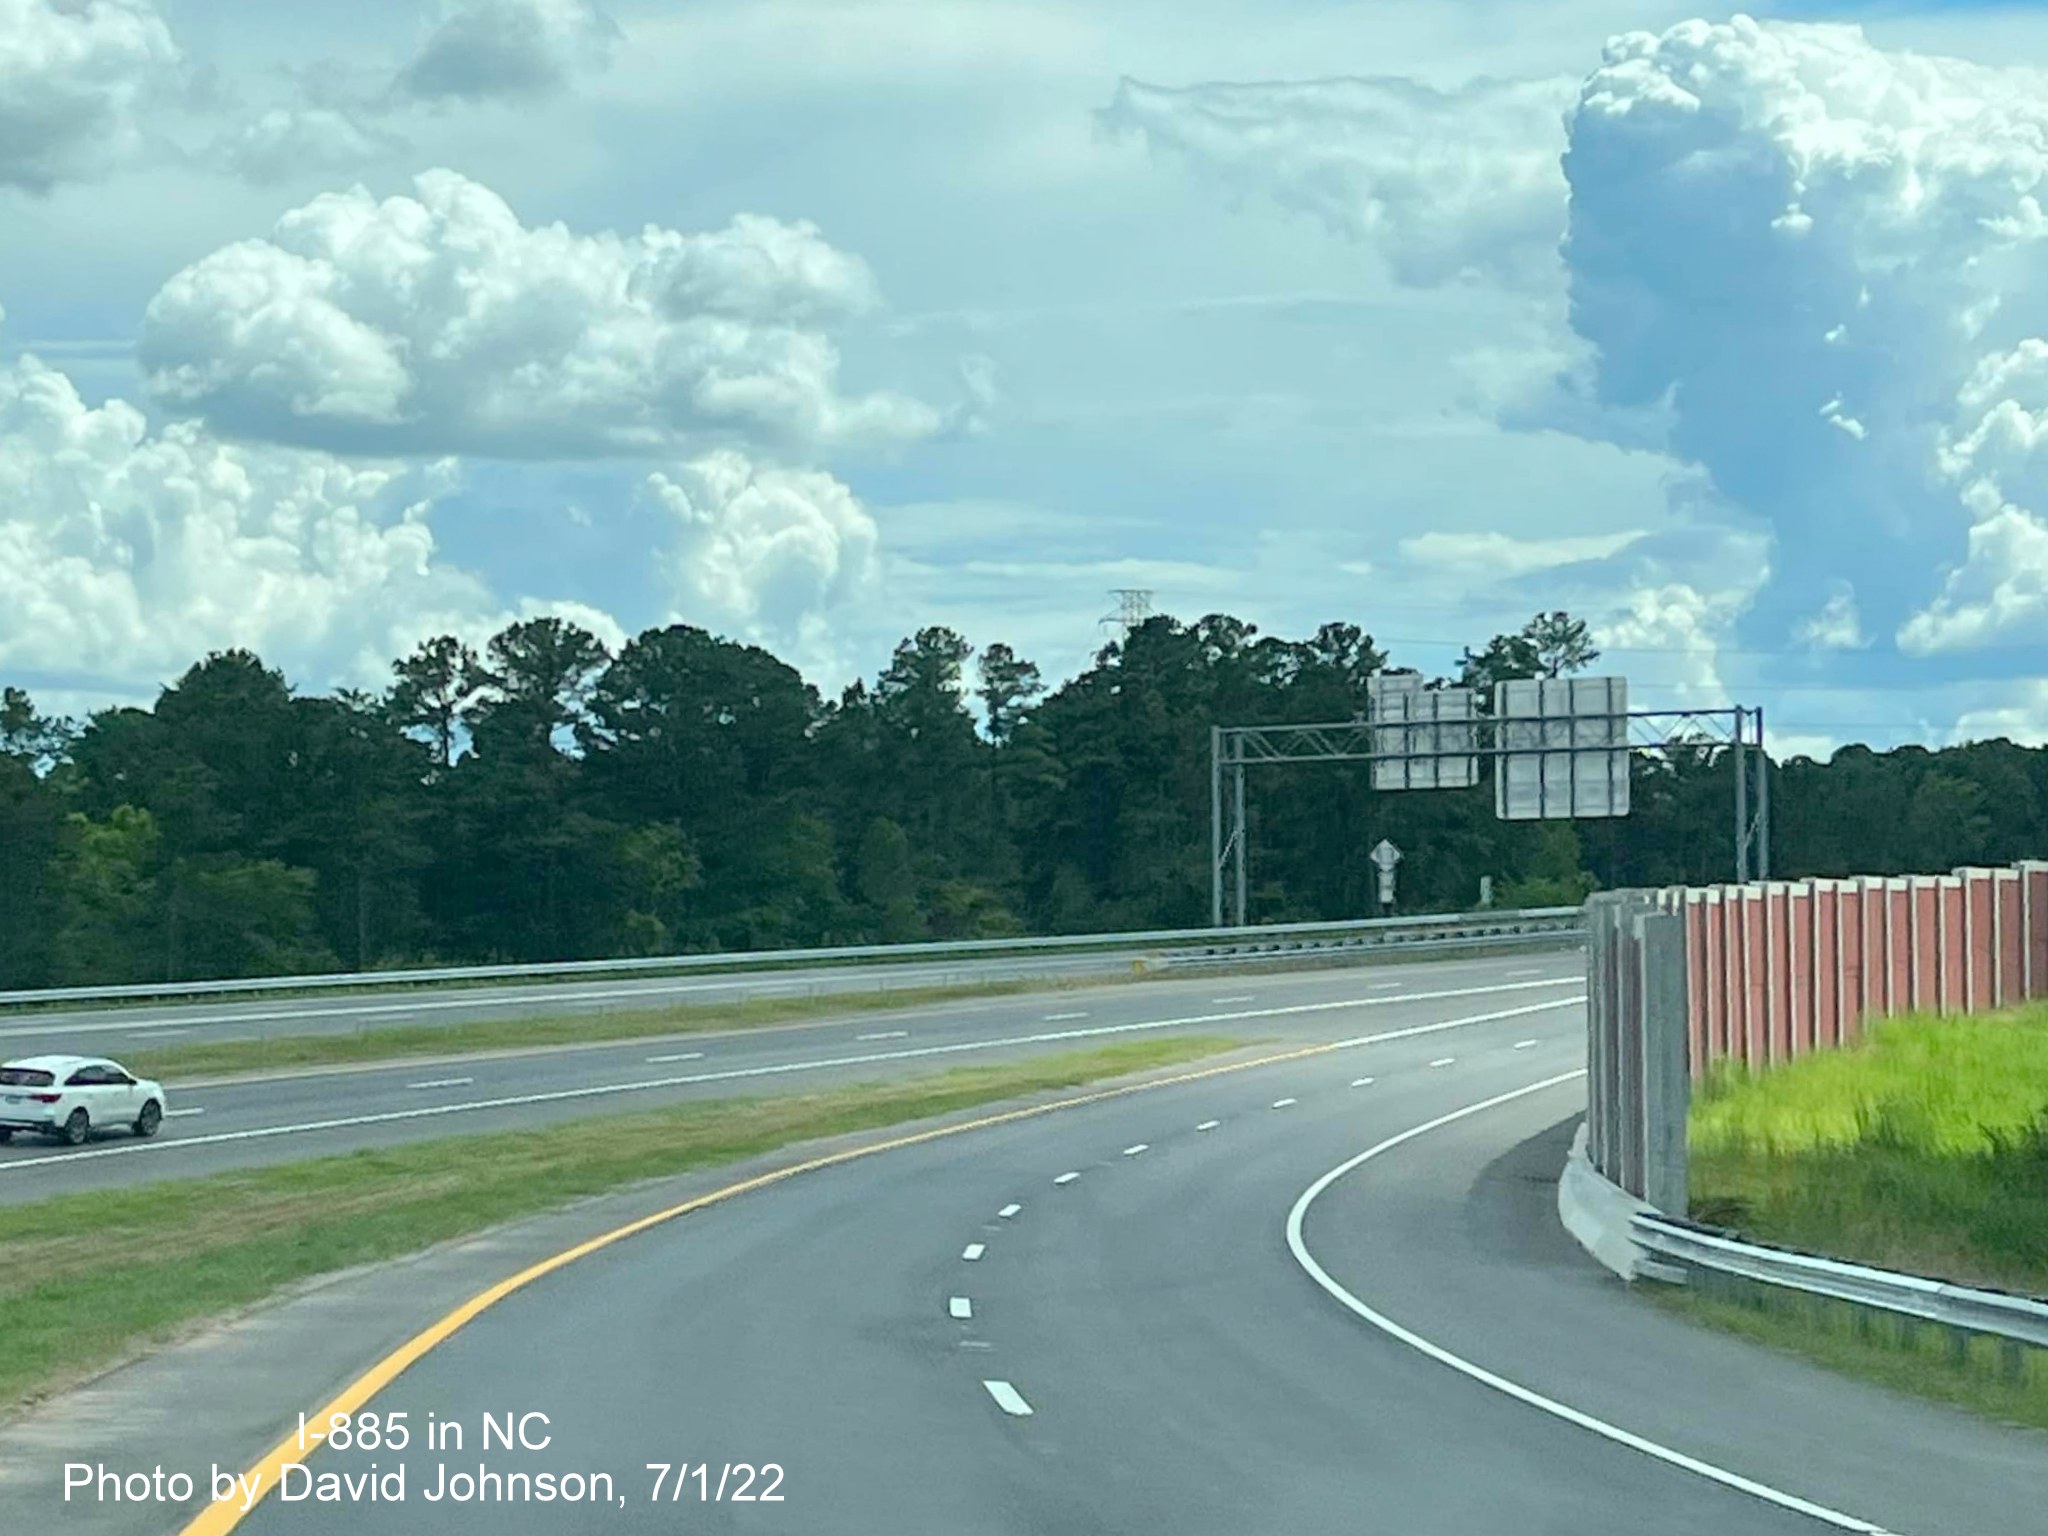 Image of merging of US 70 East and I-885 South ramps on East End Connector in Durham, by David Johnson July 2022